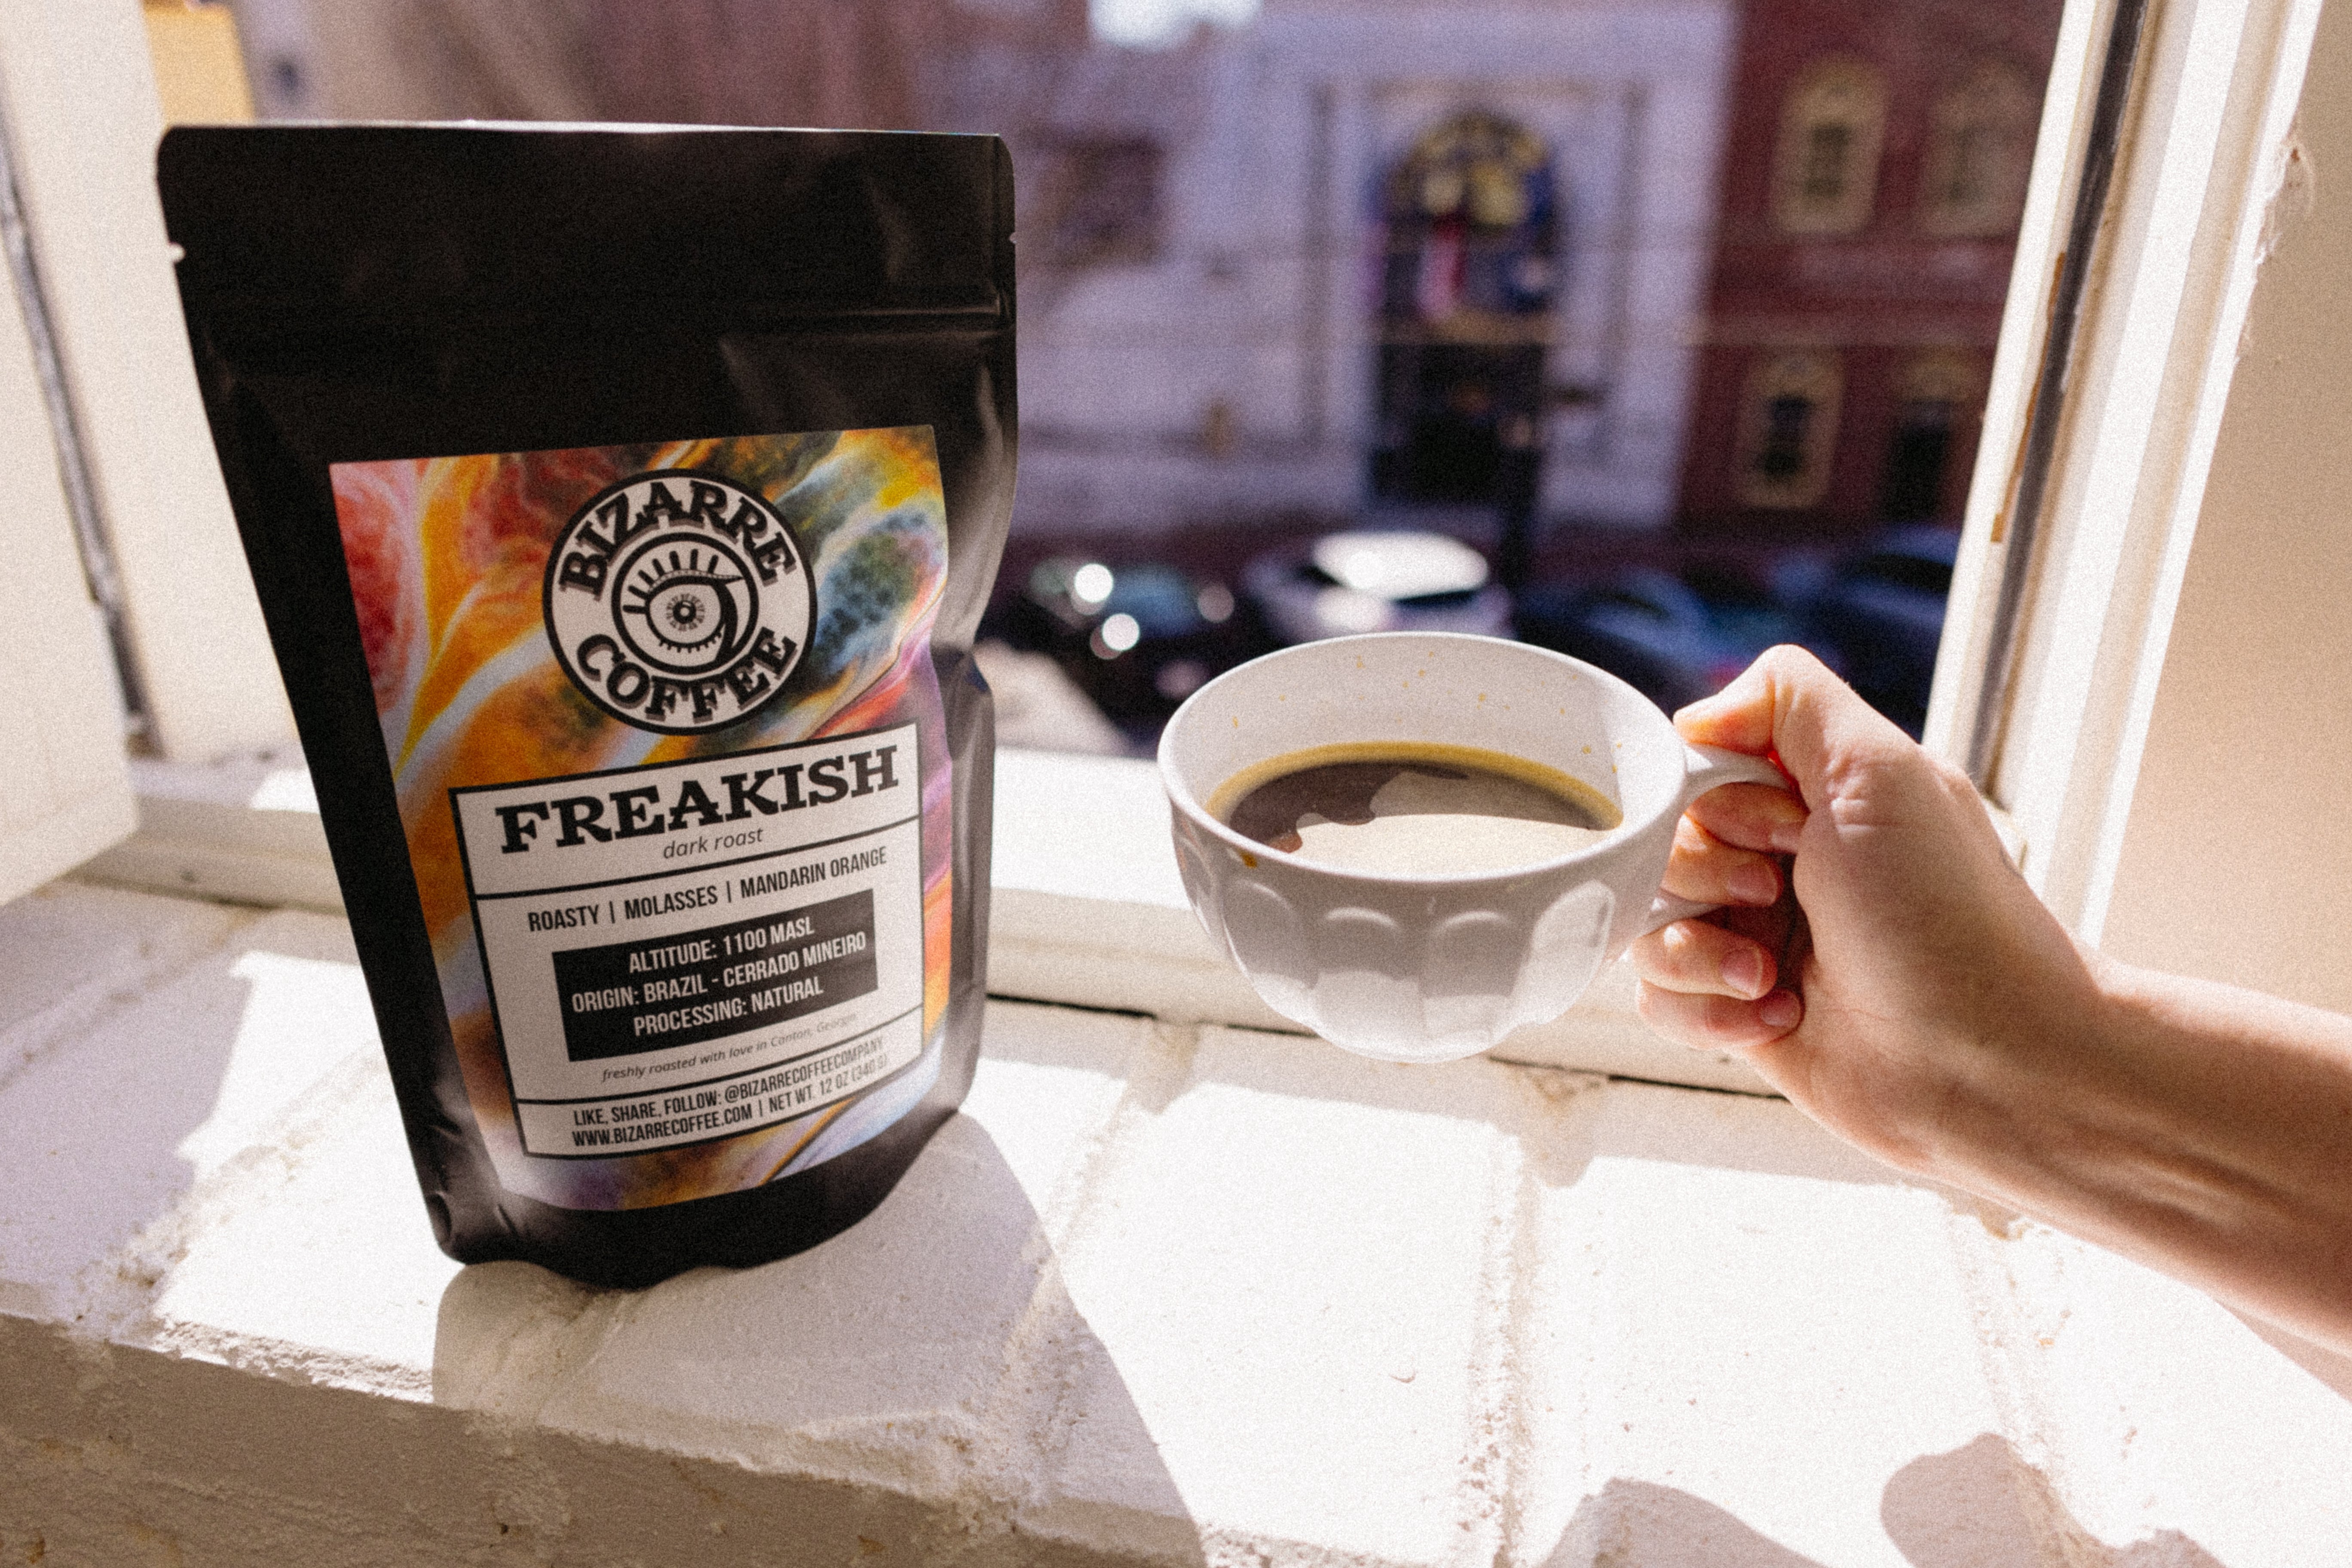 A bag of Freakish Bizarre Coffee with a mug in a person's hand.